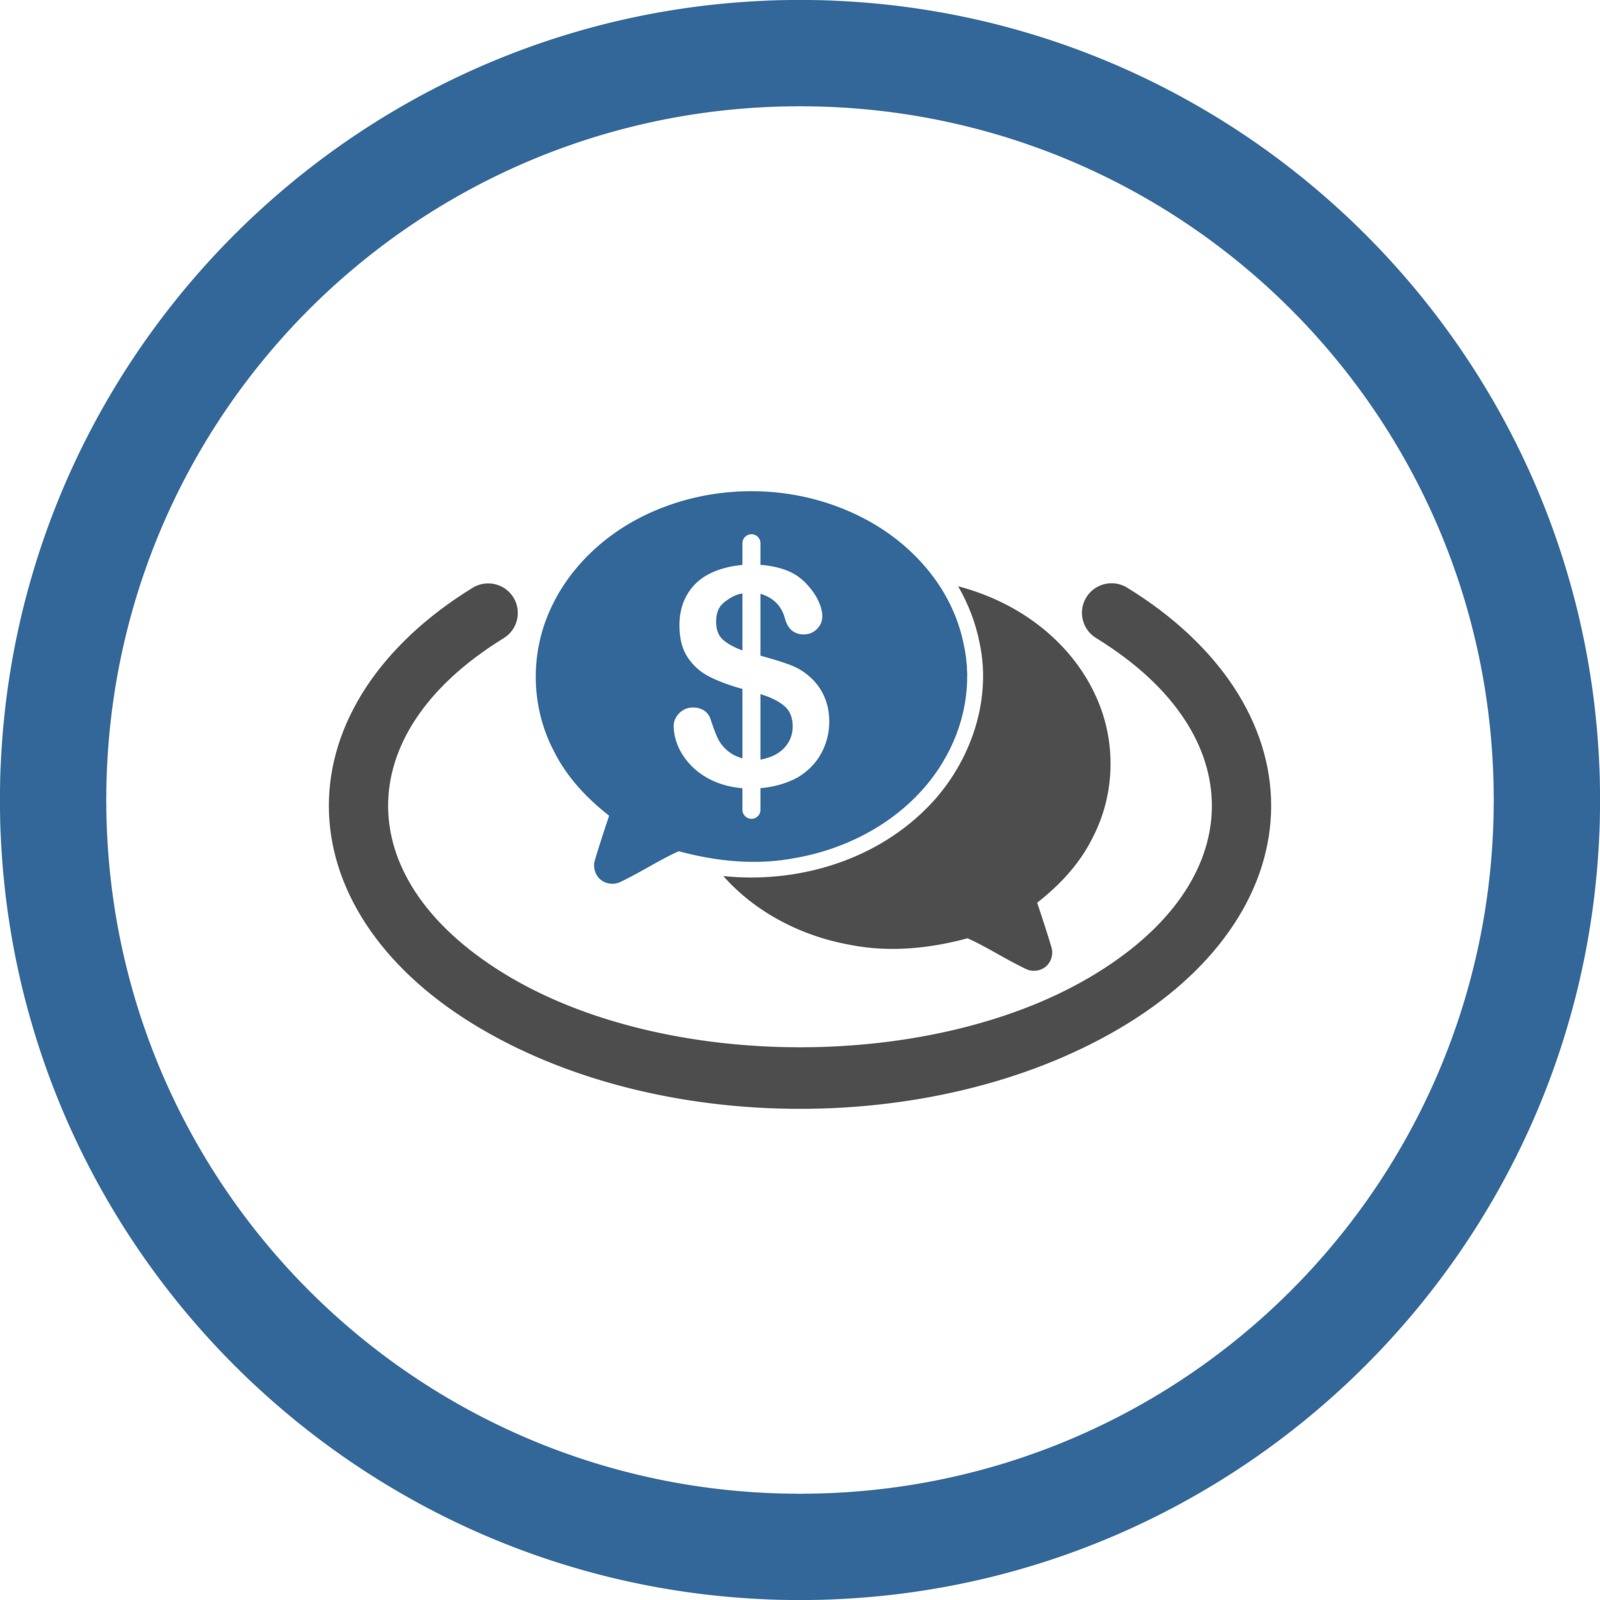 Financial Network vector icon. This flat rounded symbol uses cobalt and gray colors and isolated on a white background.